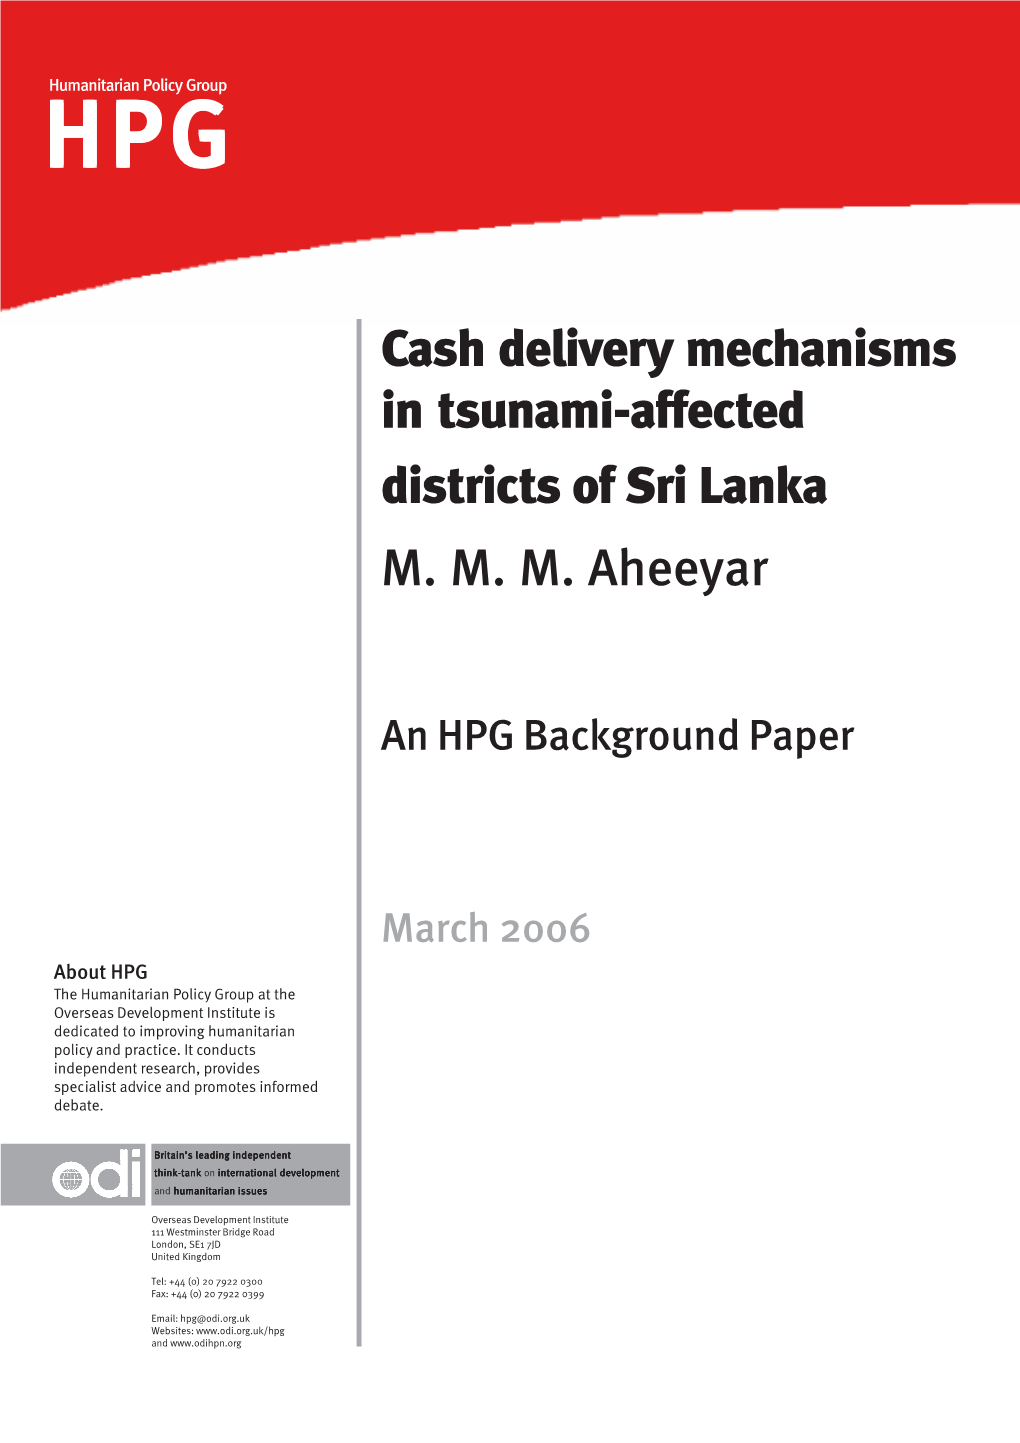 Cash Delivery Mechanisms in Tsunami-Affected Districts of Sri Lanka